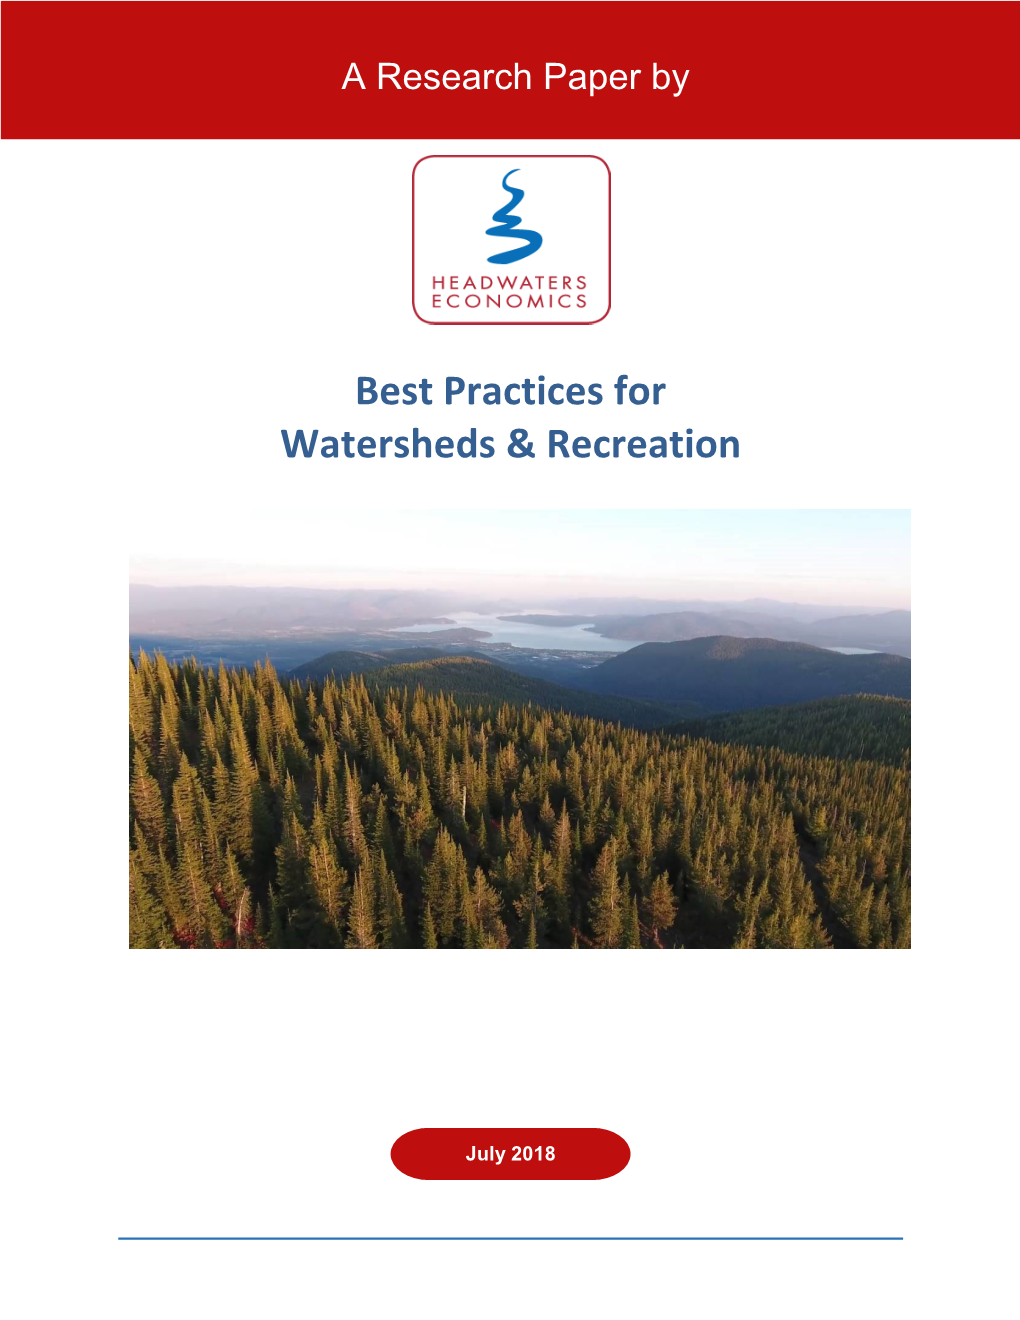 Best Practices for Watersheds & Recreation